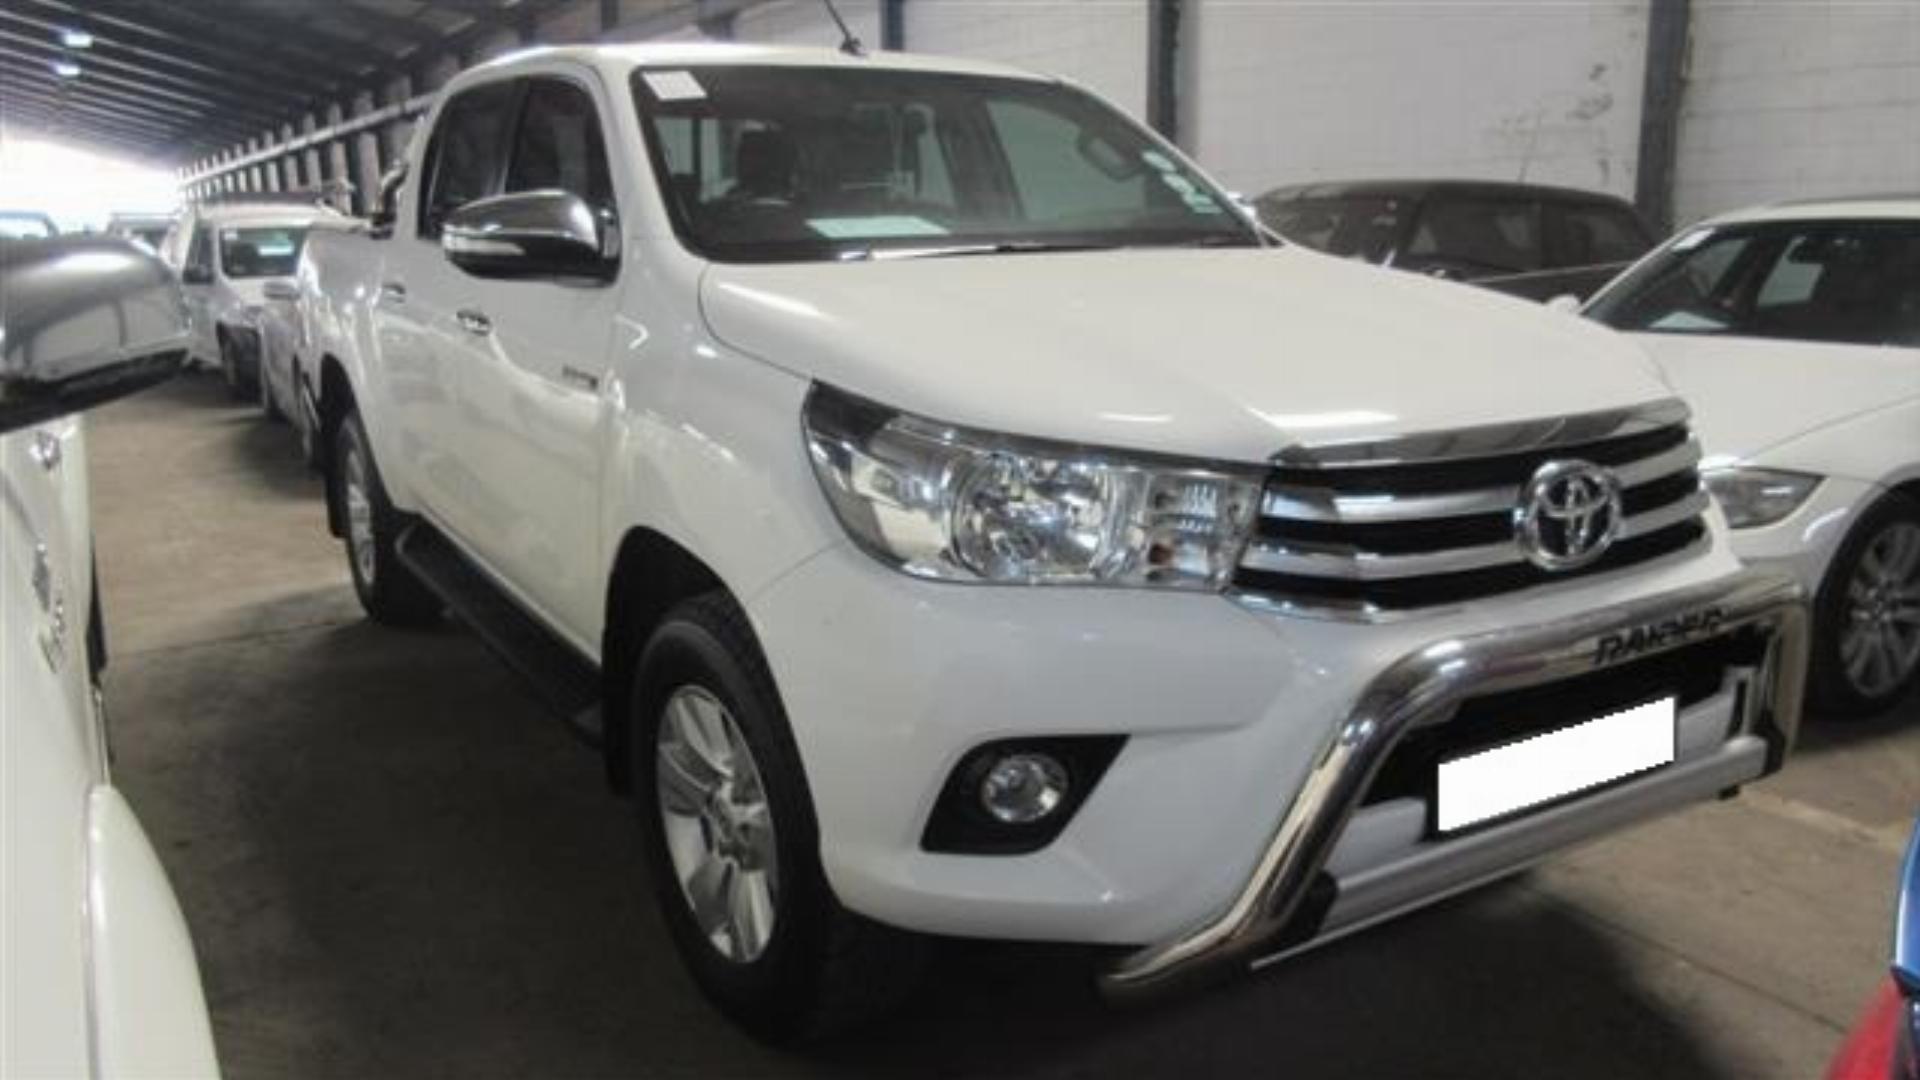 Toyota Hilux DC 2.8 GD-6 RB